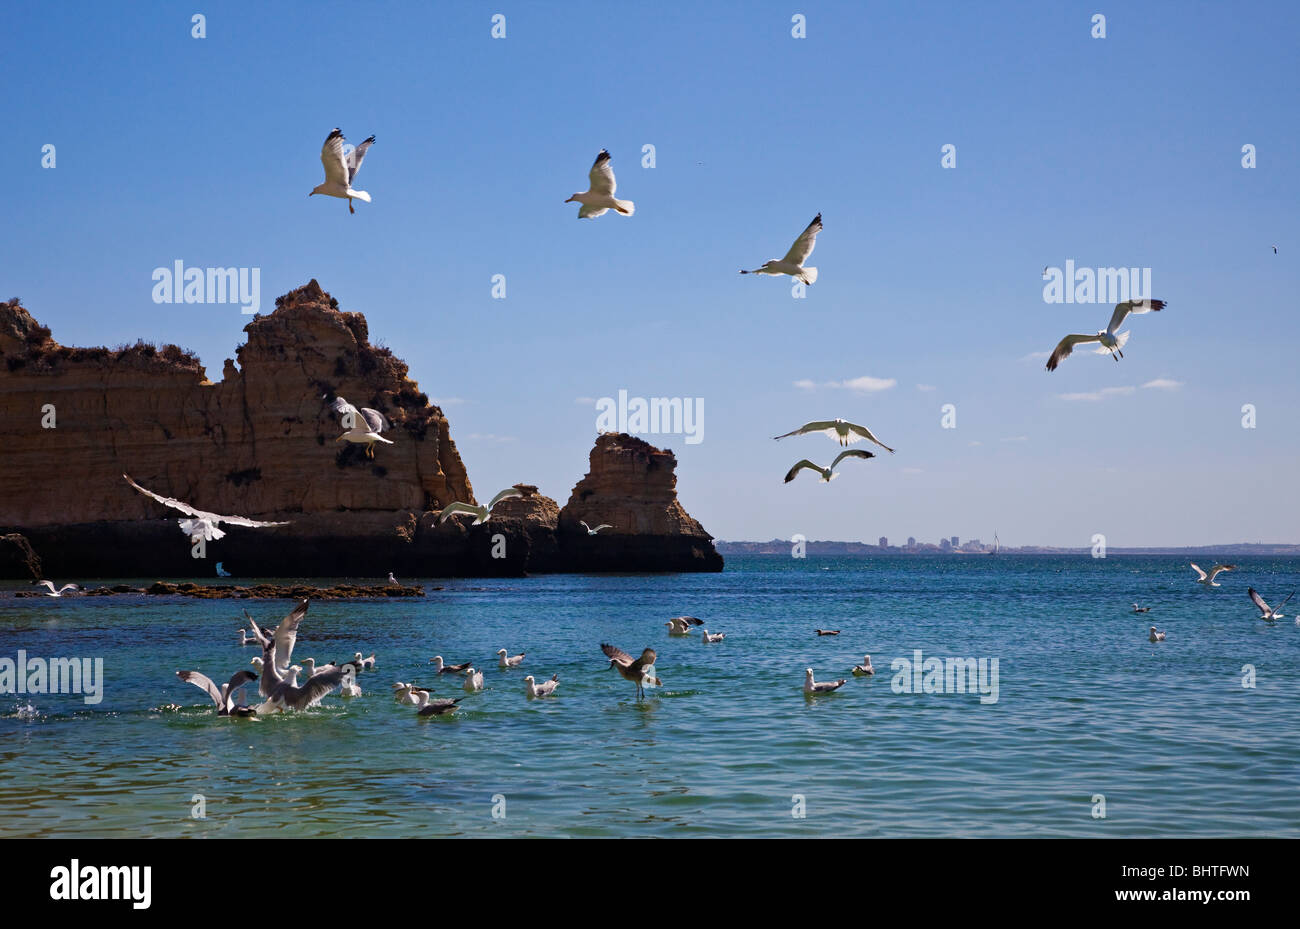 Flying seagulls on the beach in front of a rock under a blue sky at cliffs in Algarve Stock Photo